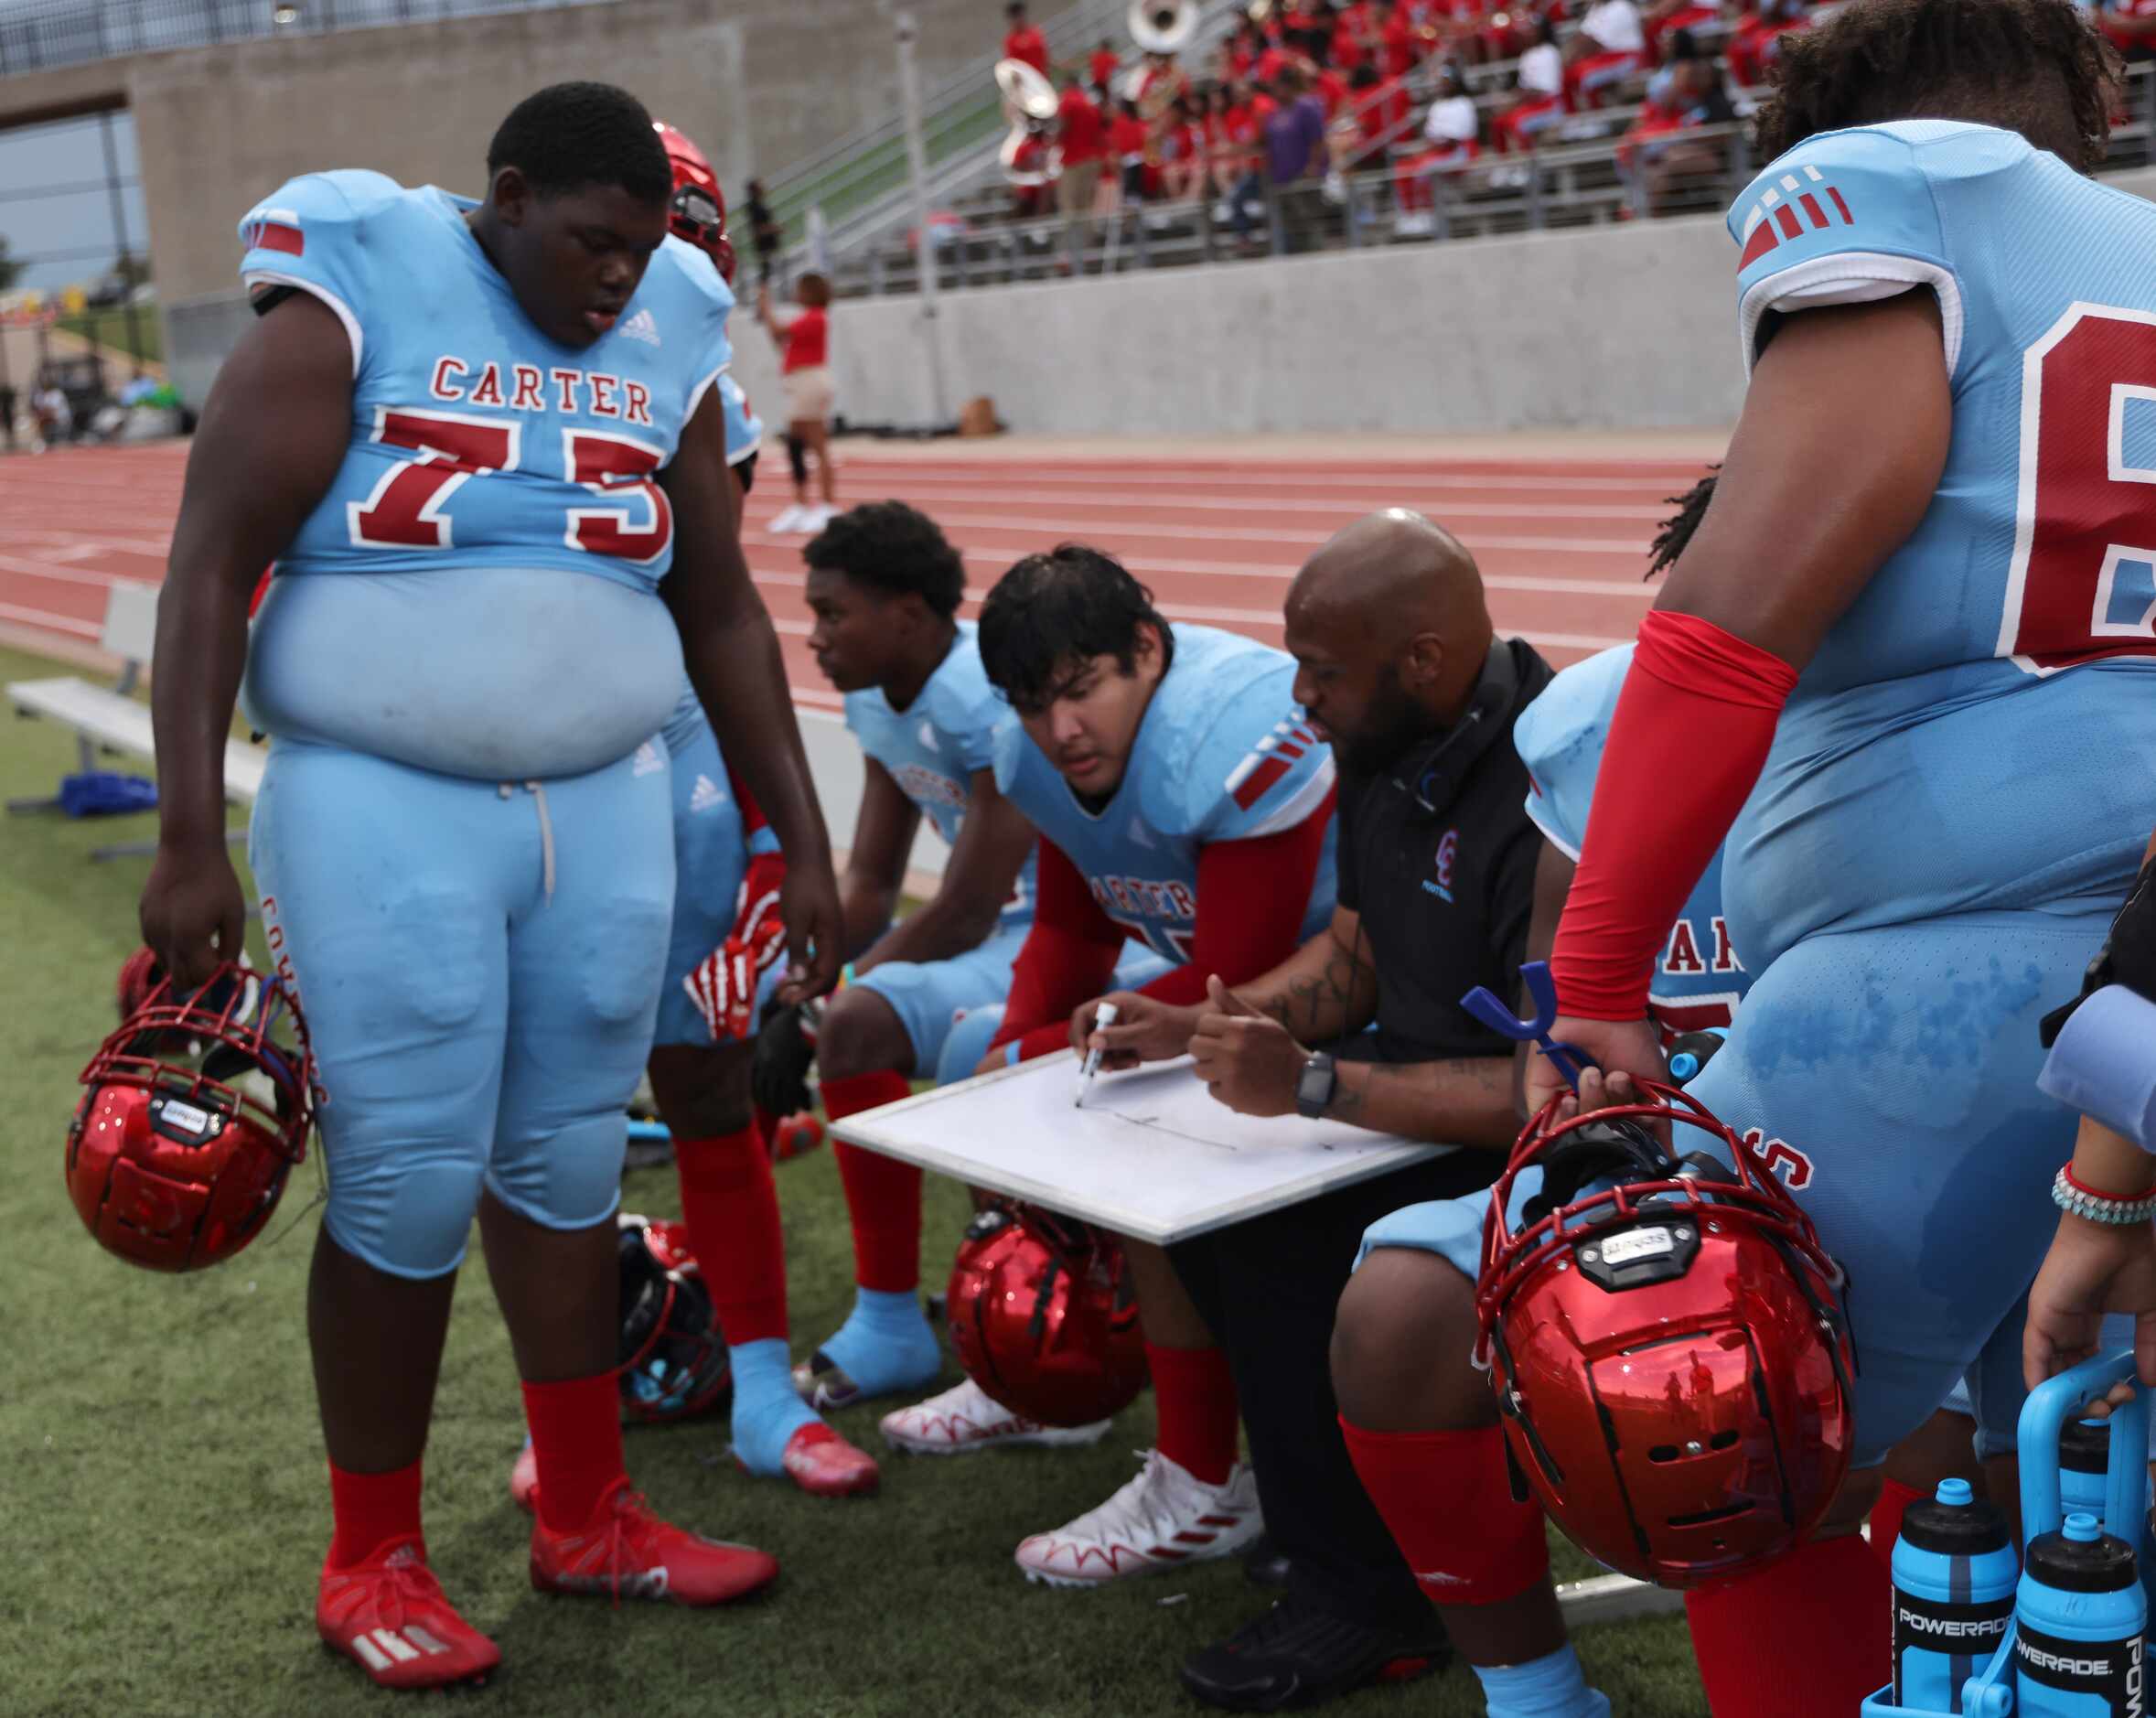 A Dallas Carter assistant coach goes over game strategy with players on the team sideline...